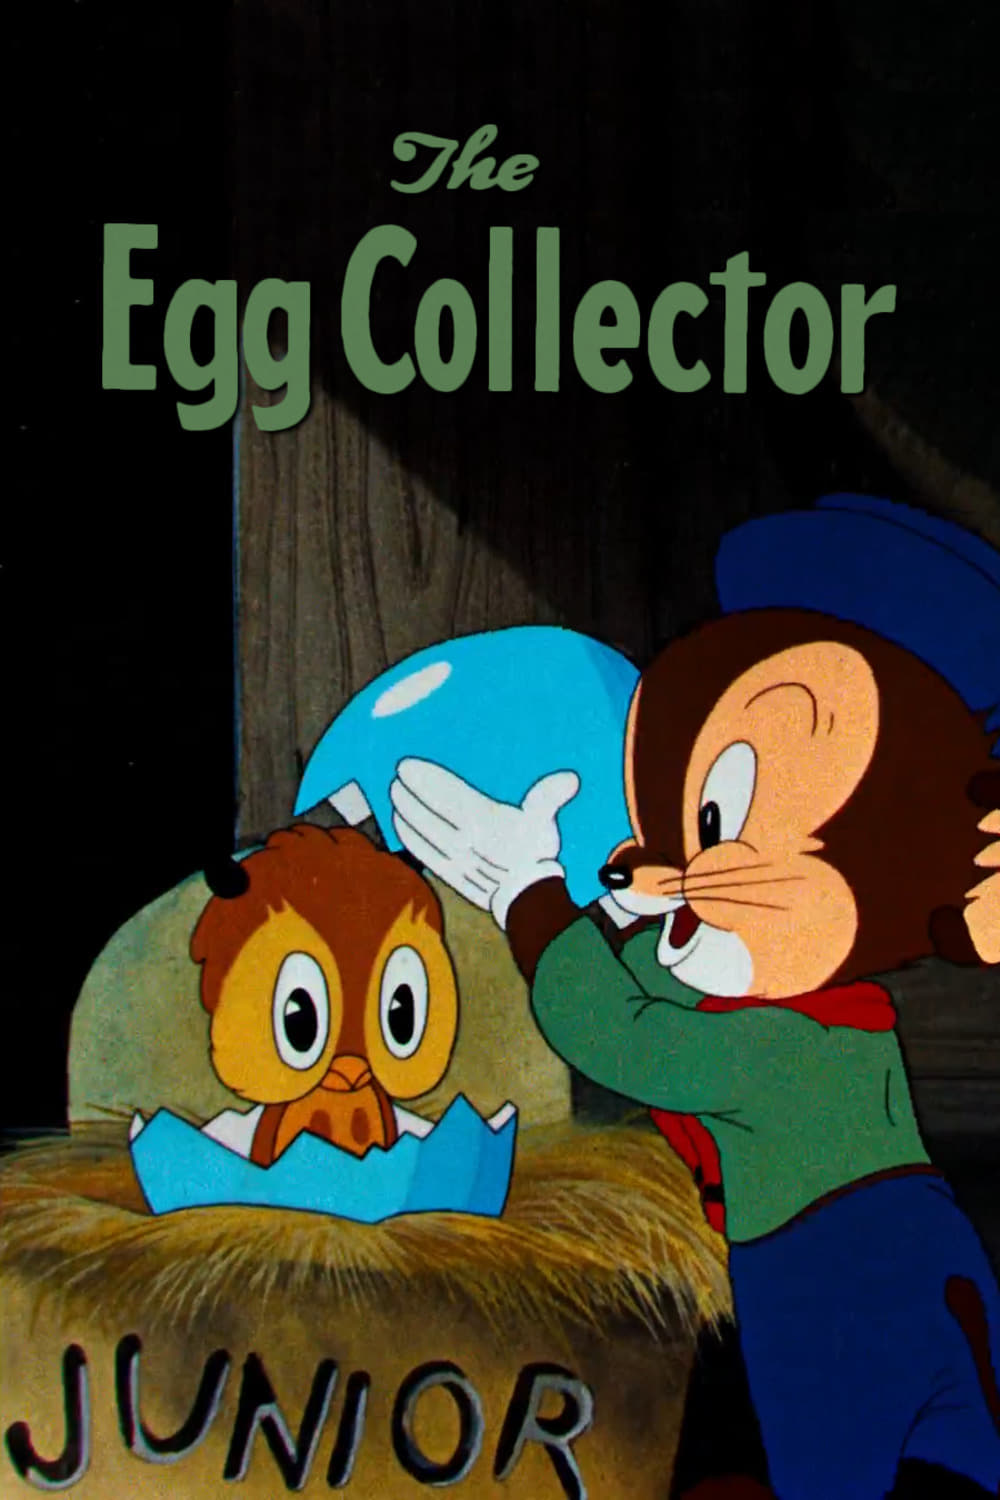 The Egg Collector (1940)